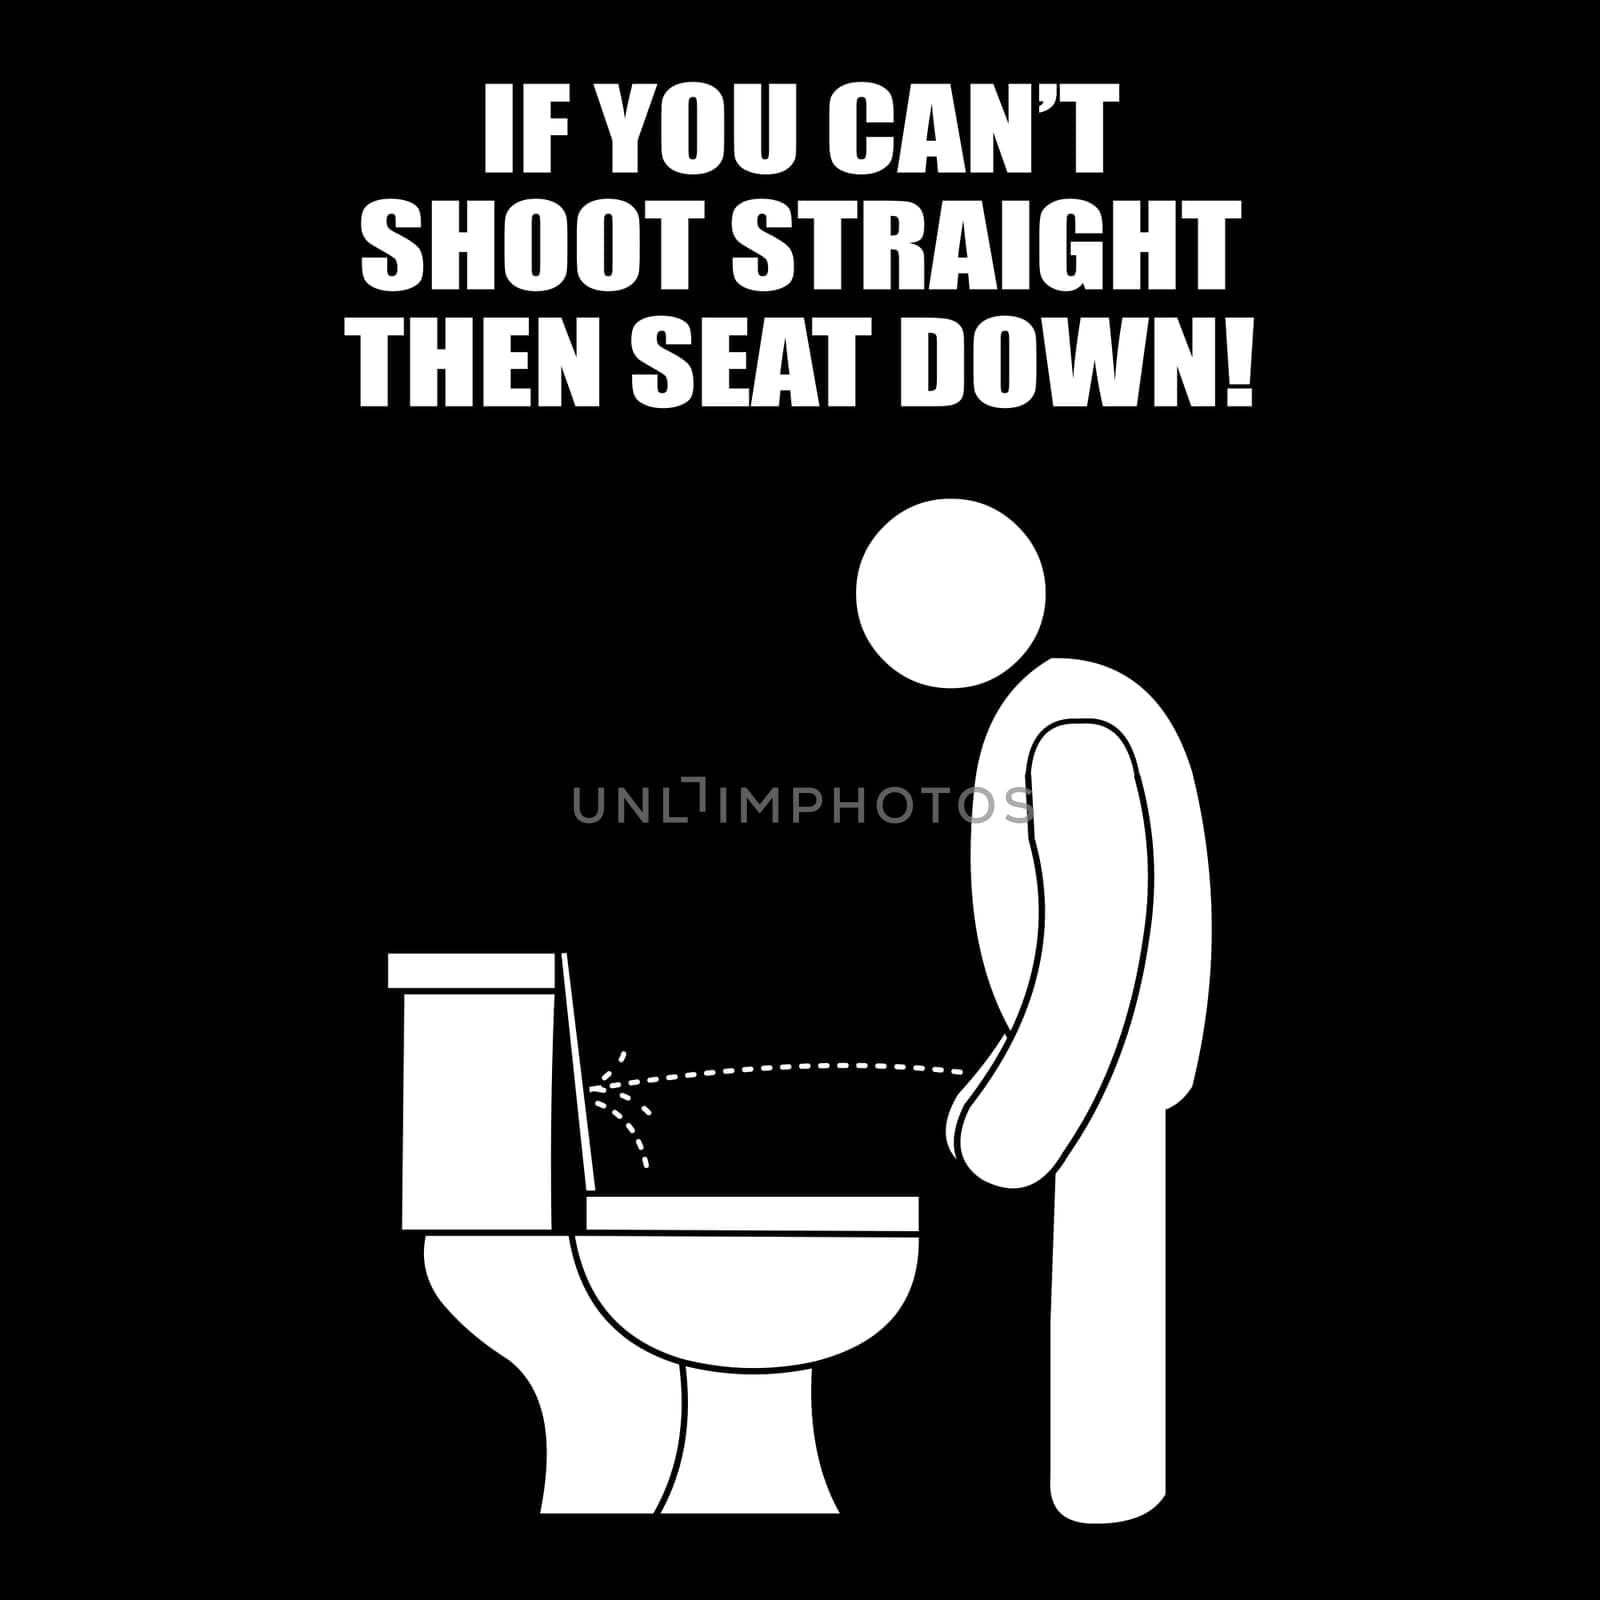 A guy peeing and missing the toilet ring with the text above it "If you can't shoot straight, seat down".